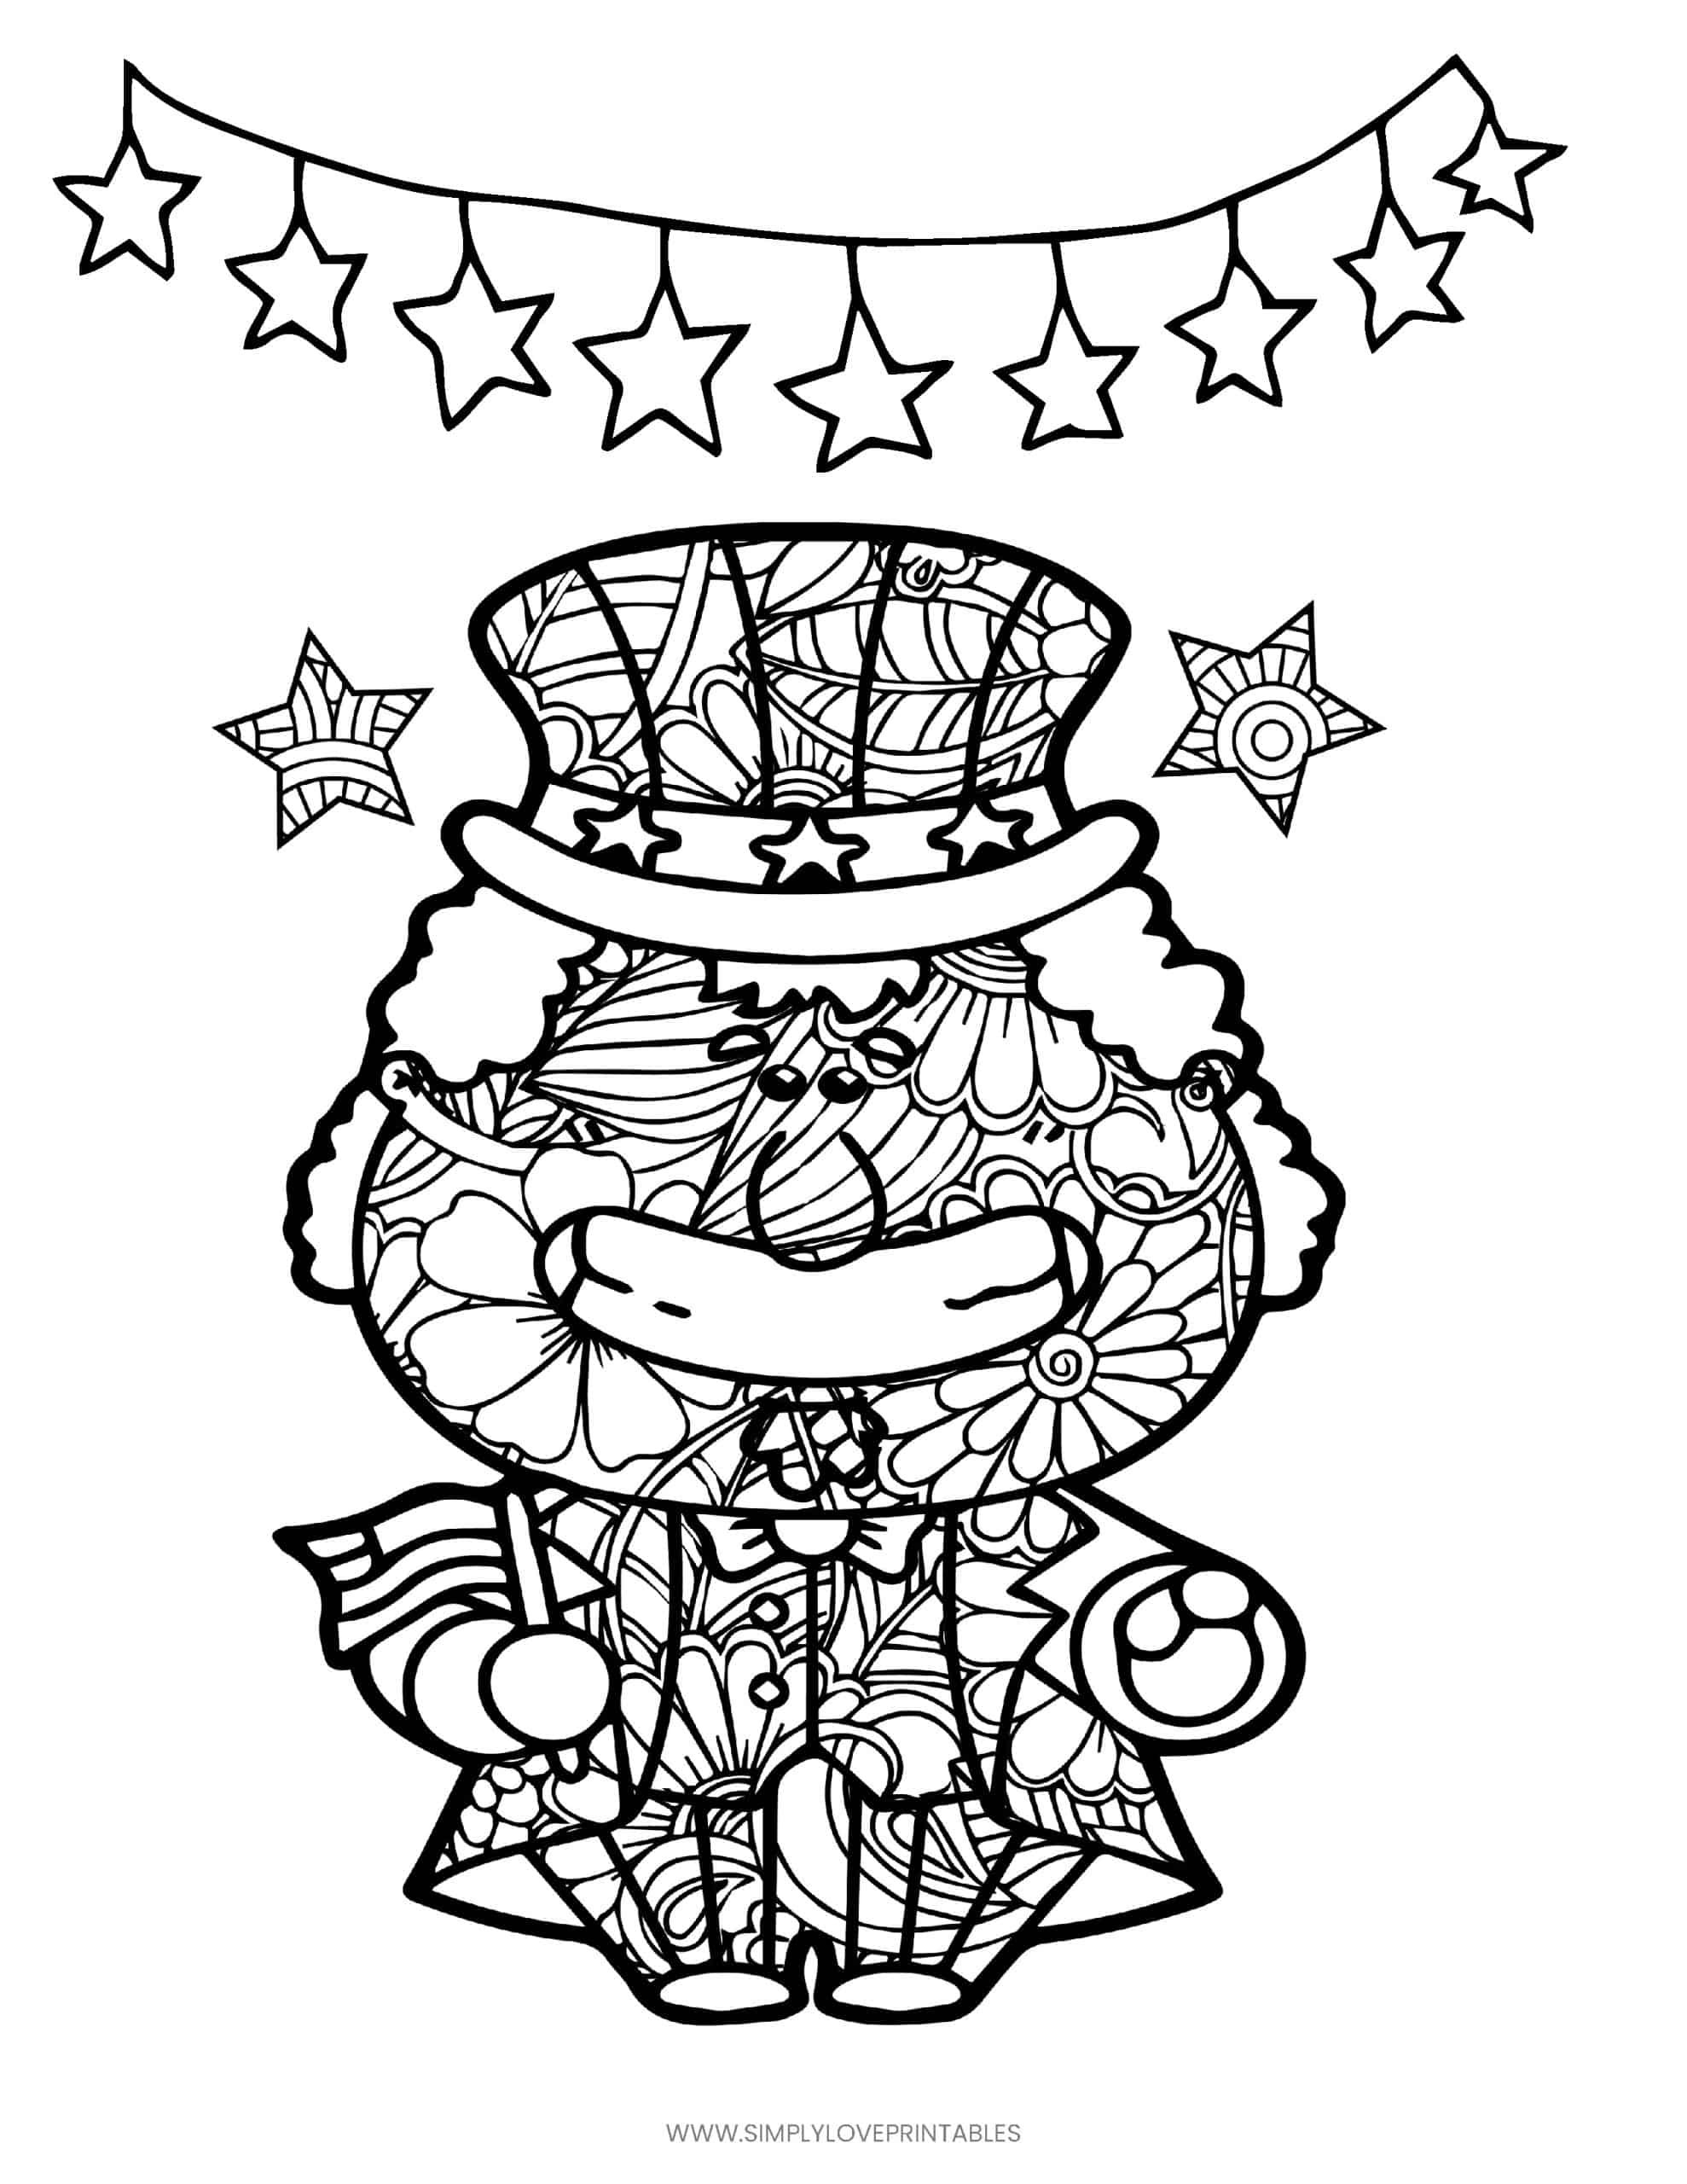 Celebrate Freedom with 4th of July: 180+ Free Coloring Pages 113